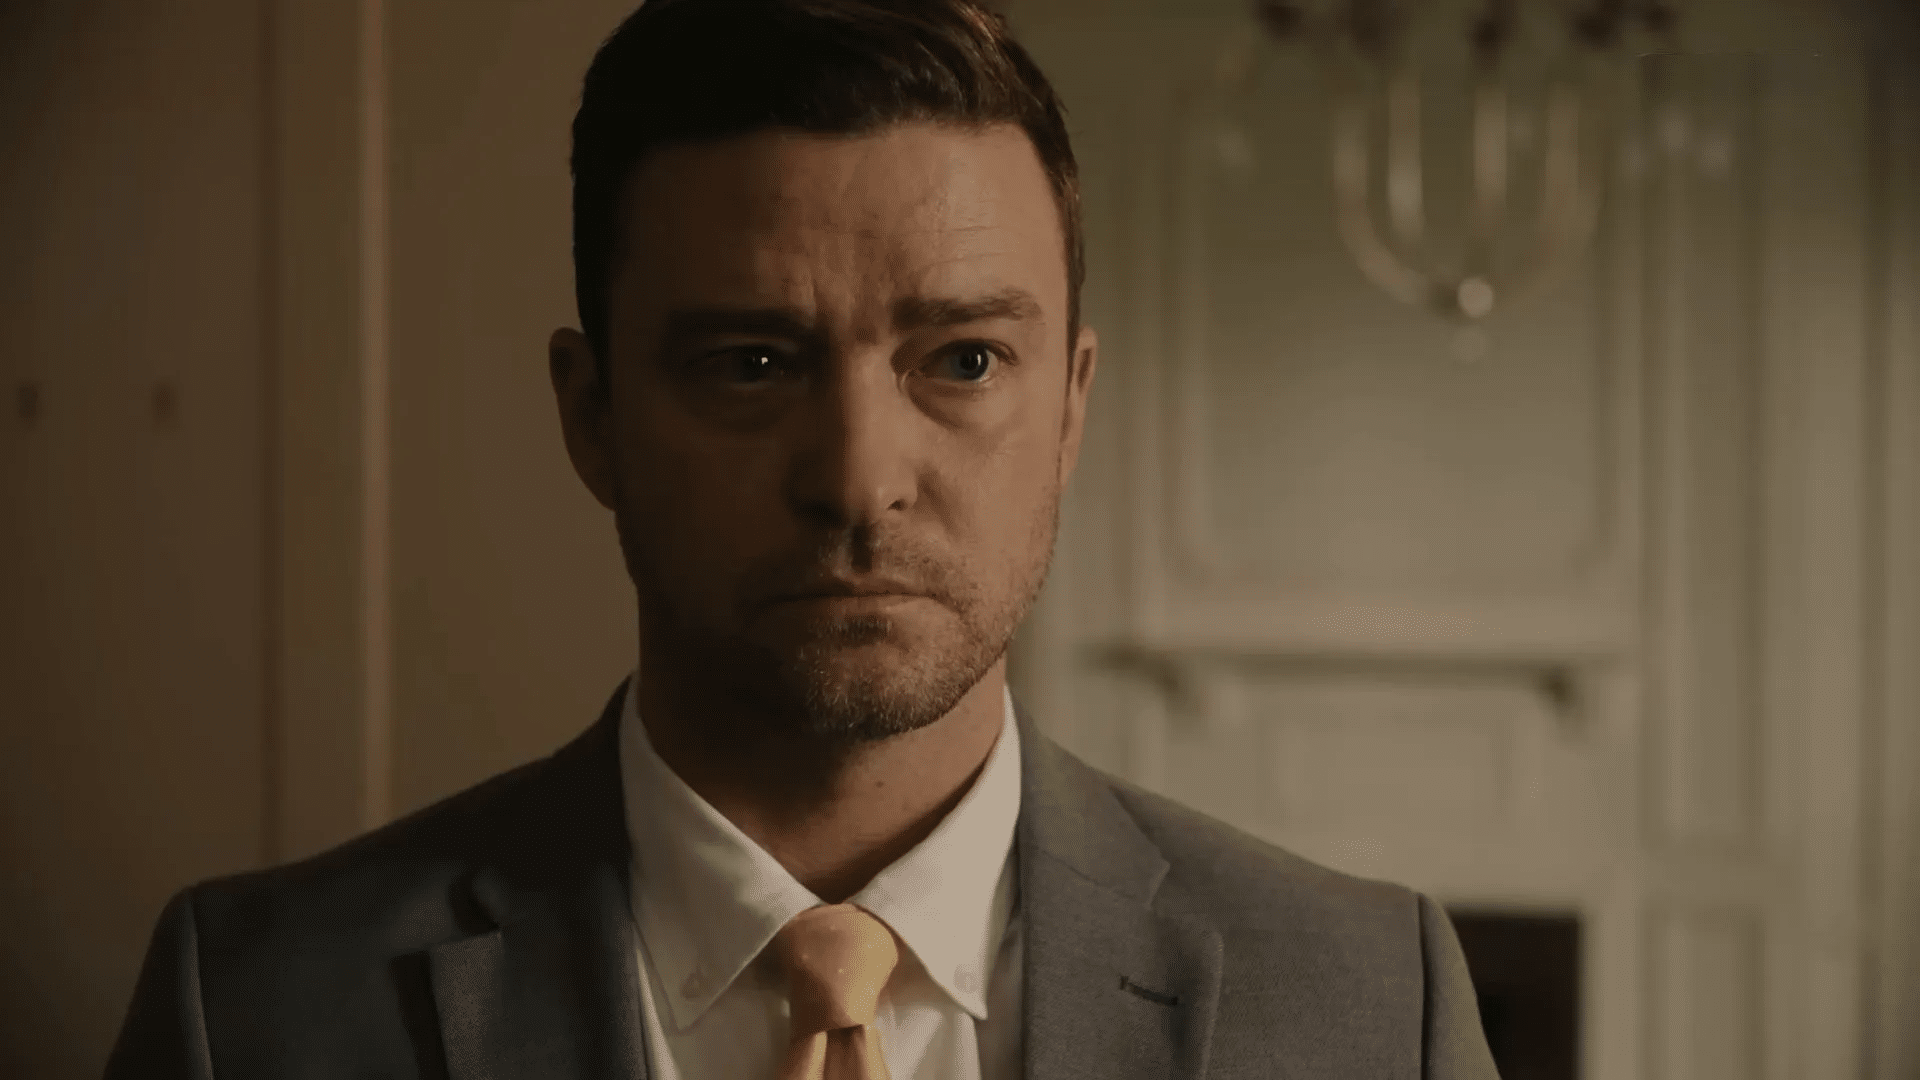 Justin Timberlake as Will Grady in Reptile movie